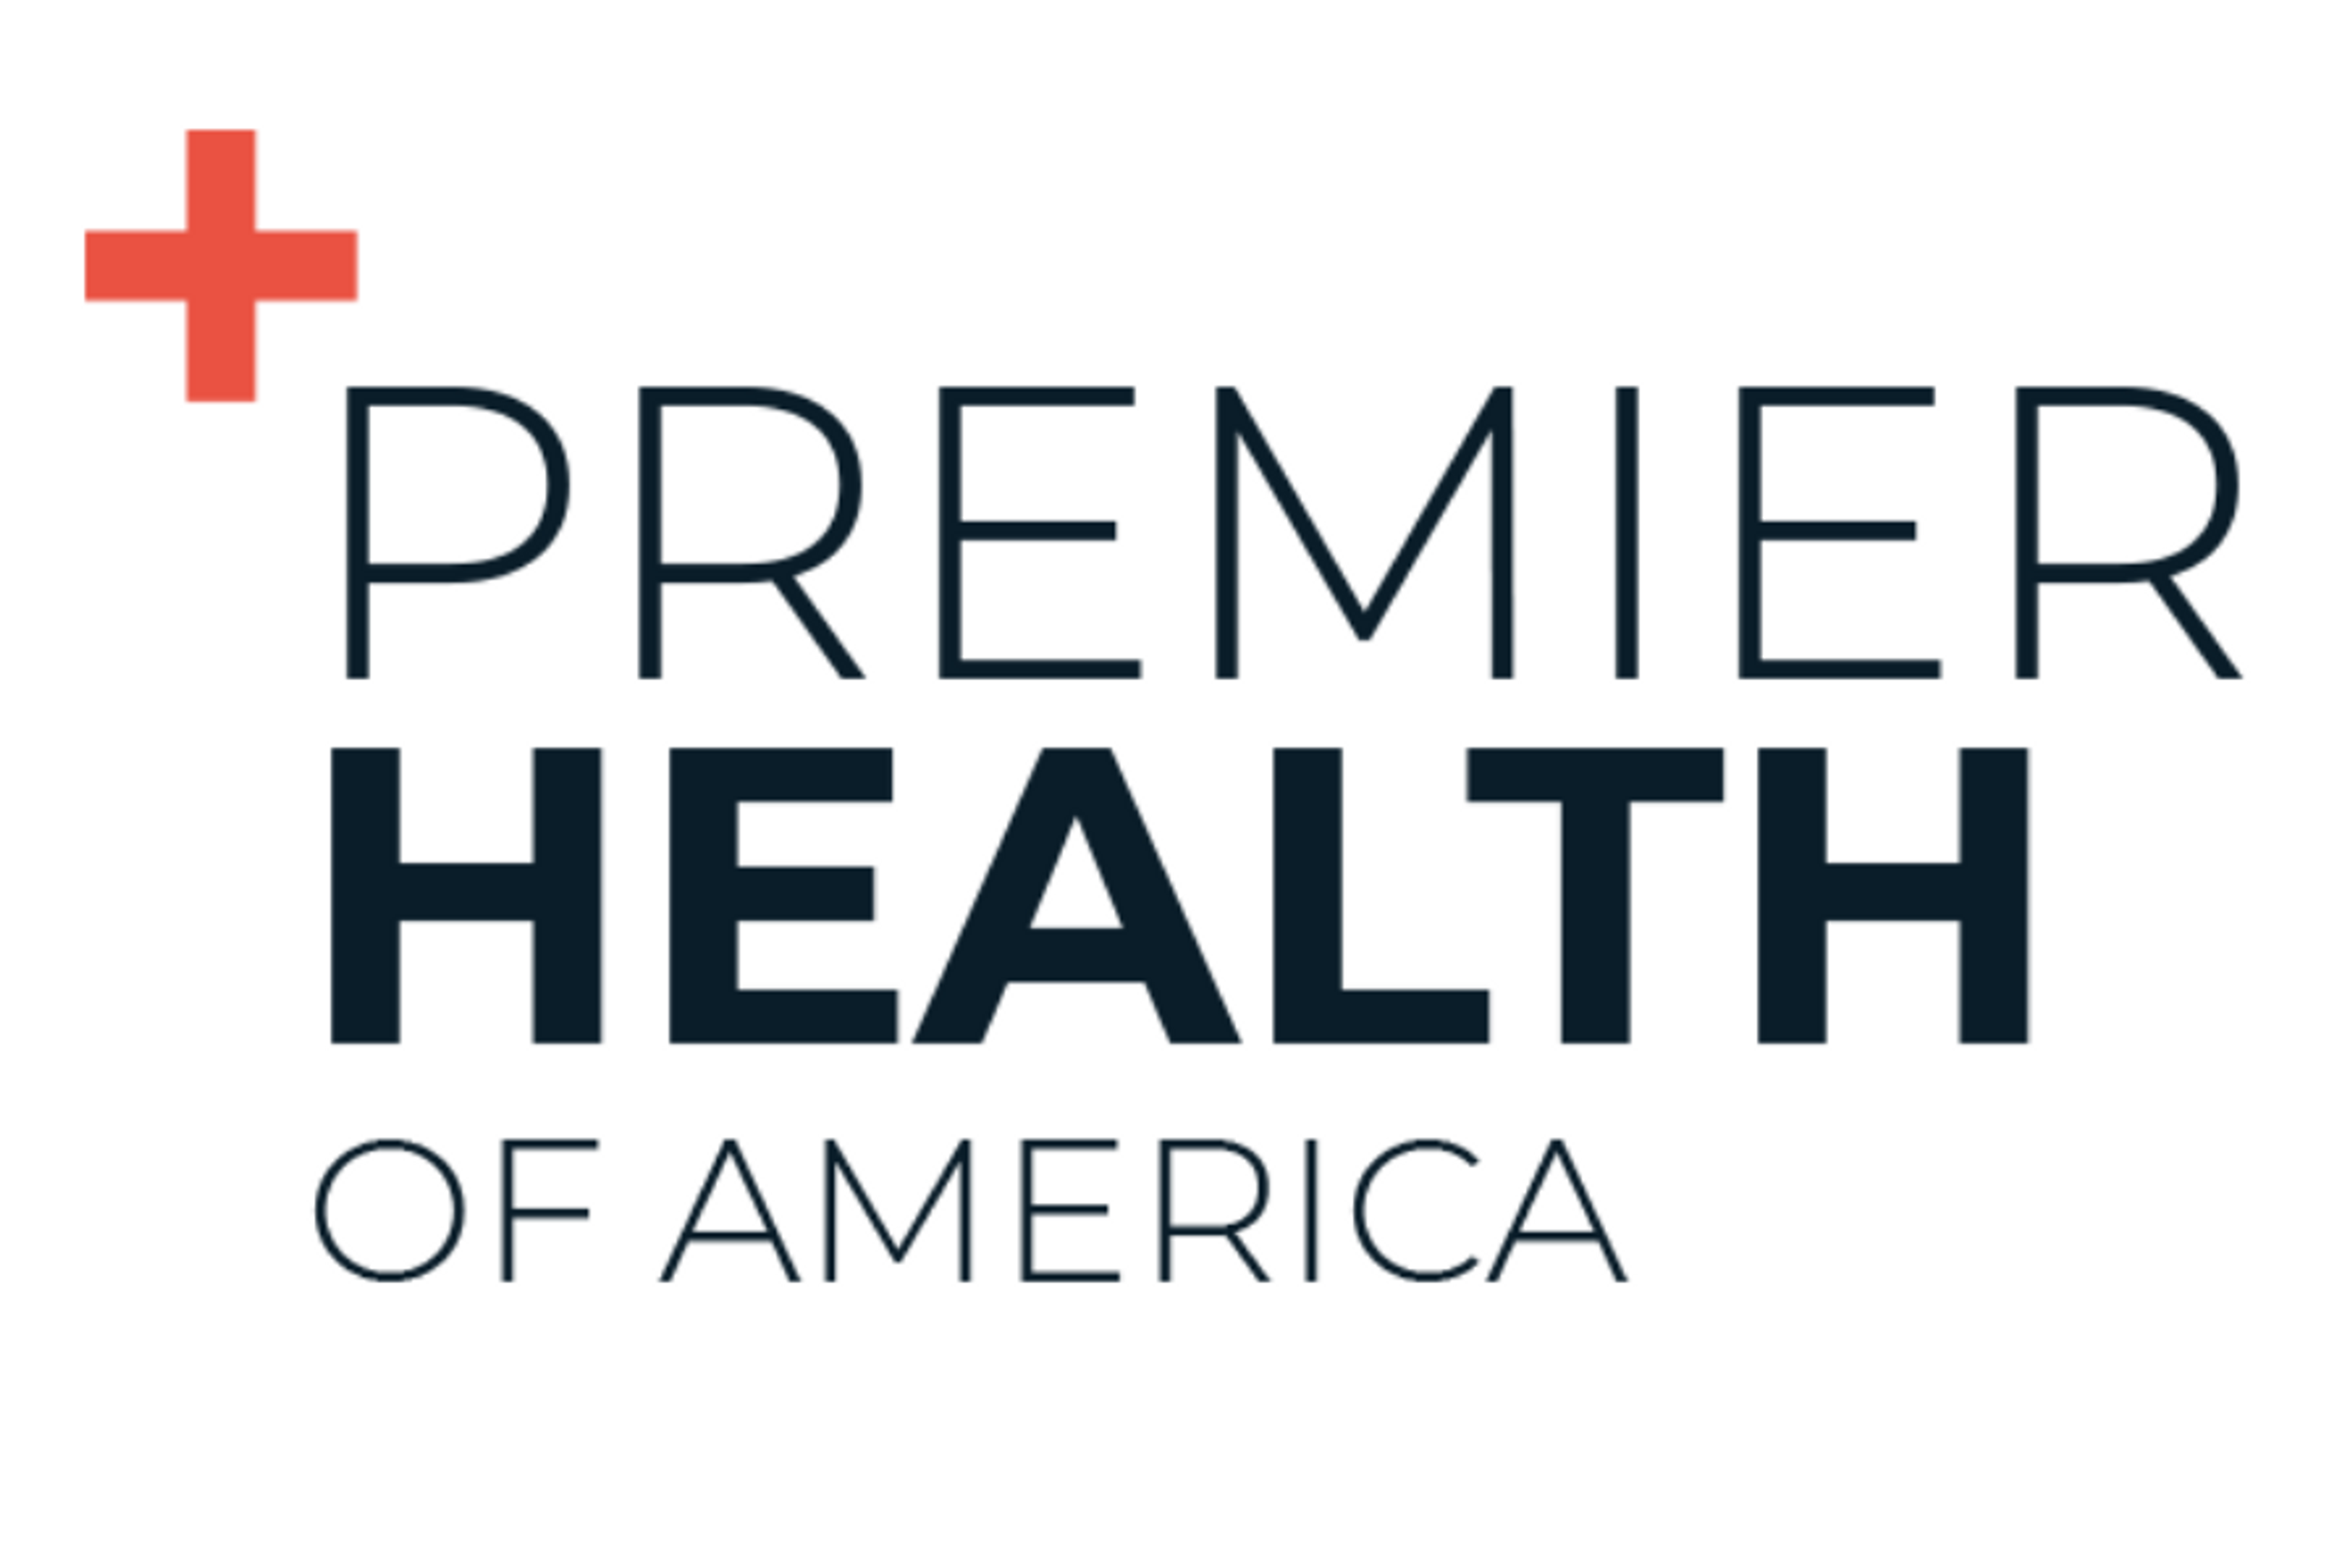 Premier Health Announces Grant of Options and Deferred Share Units